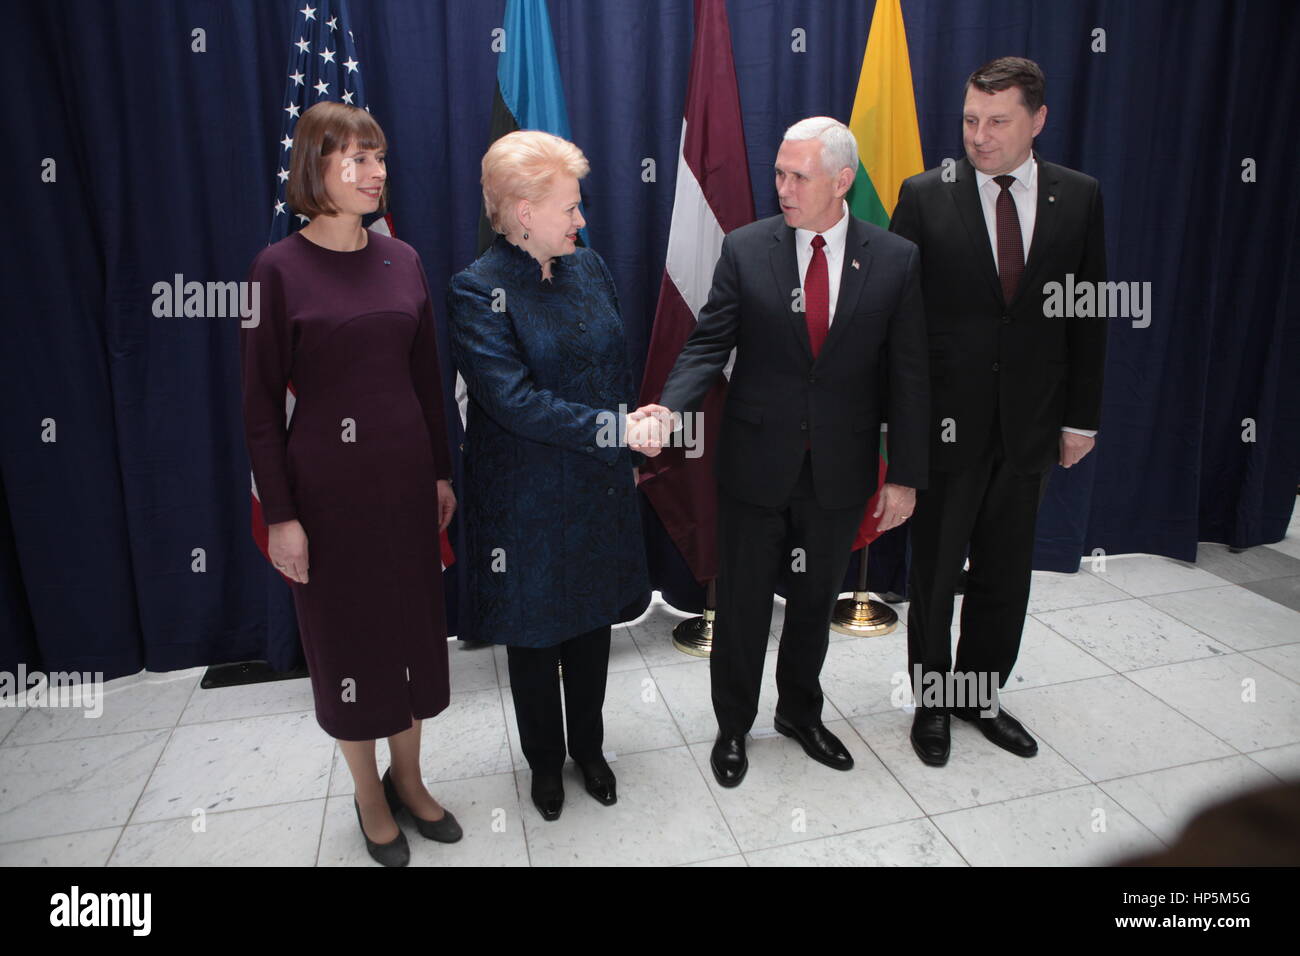 Munich, Germany. 18th Feb, 2017. U.S. Vice President Mike Pence takes part in a multilateral meeting with members of the Baltic States of Estonia, Latvia and Lithuania  on the sidelines of the Munich Security Conference February 18, 2017 in Munich, Germany. Participants left to right are: Estonian President Kersti Kaljulaid, Lithuanian President Dalia Grbauskaite, Vice President Mike Pence and Latvian President Raimonds Vejonis. Credit: Planetpix/Alamy Live News Stock Photo